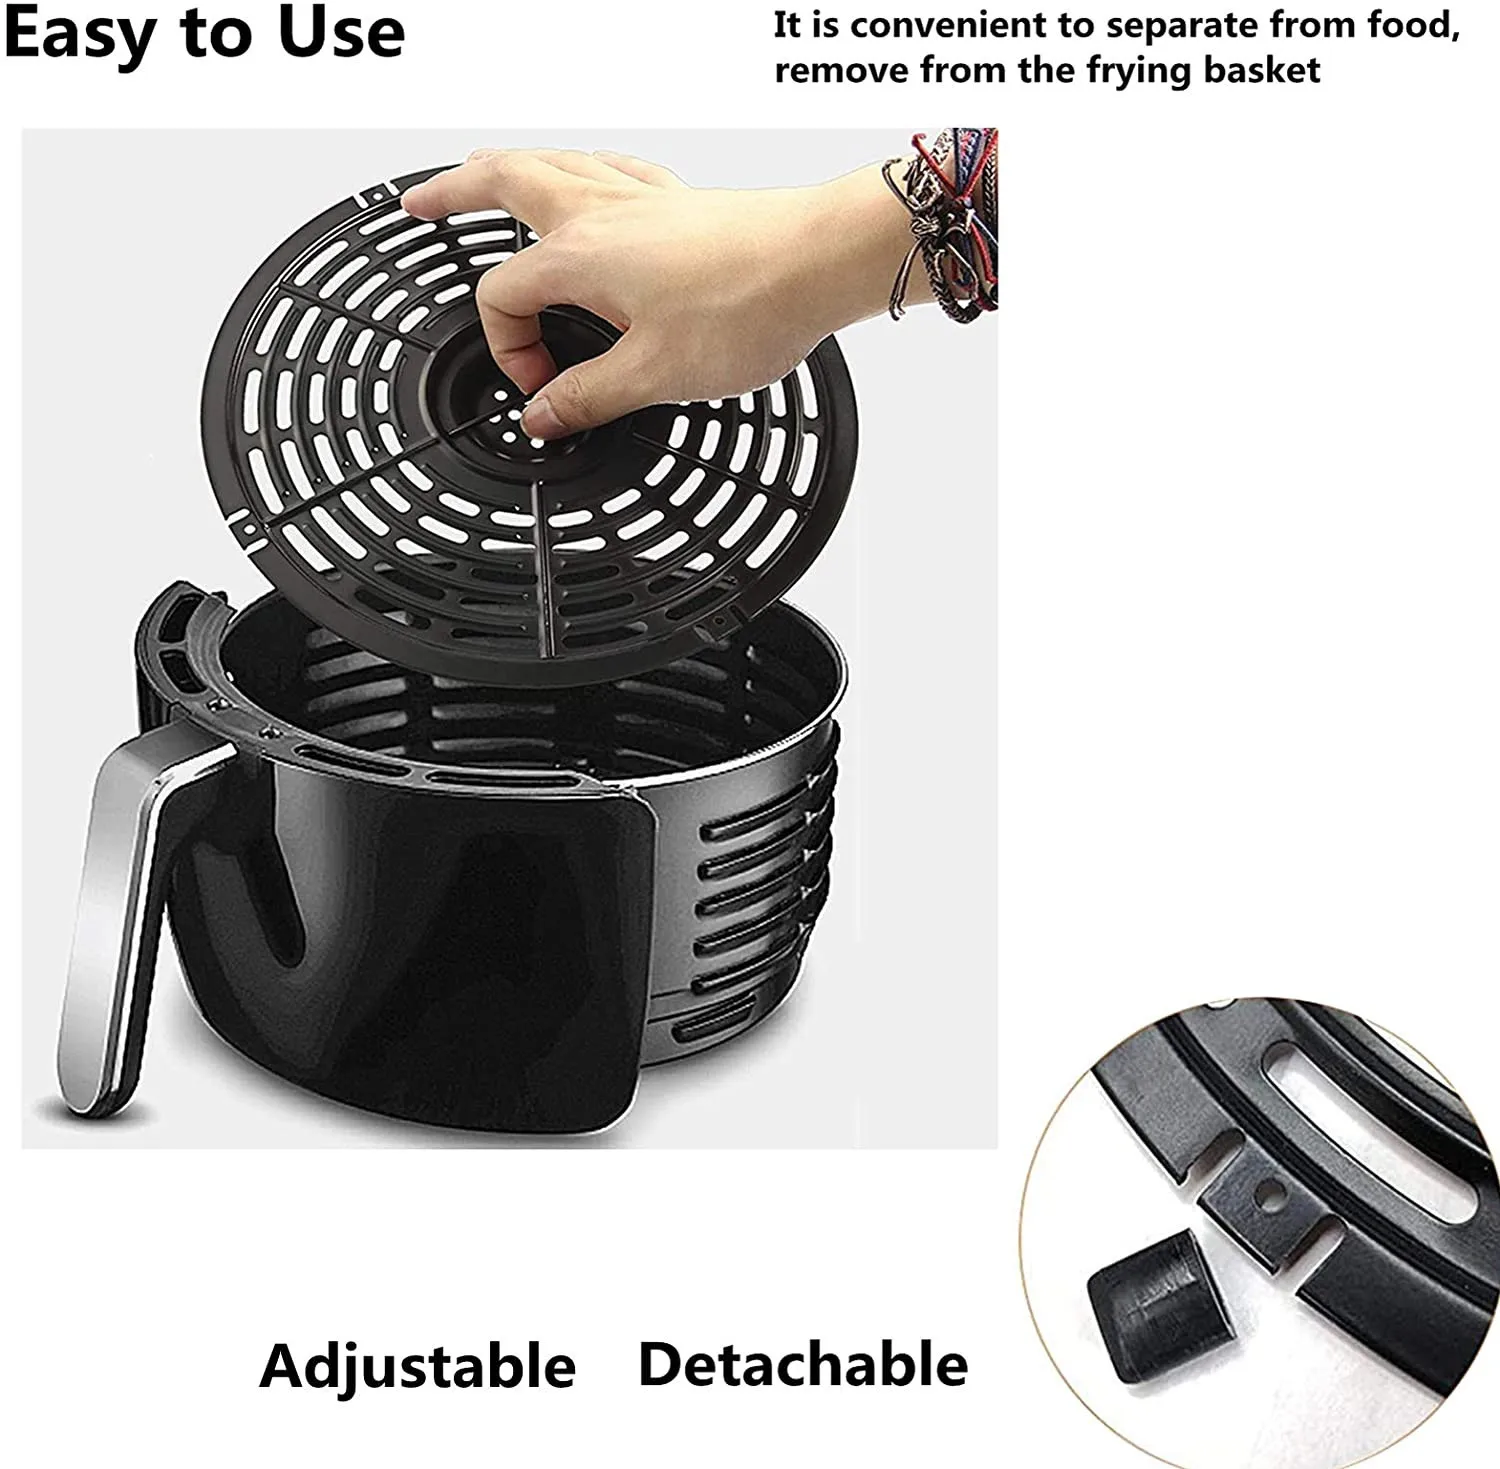 https://ae01.alicdn.com/kf/Sd4914bcb97e54da99250e8858ddd67c66/Air-Fryer-Basket-Replacement-Grill-Air-Pan-For-Power-Dash-Parts-Crisper-Plate-Non-Stick-Fry.jpg